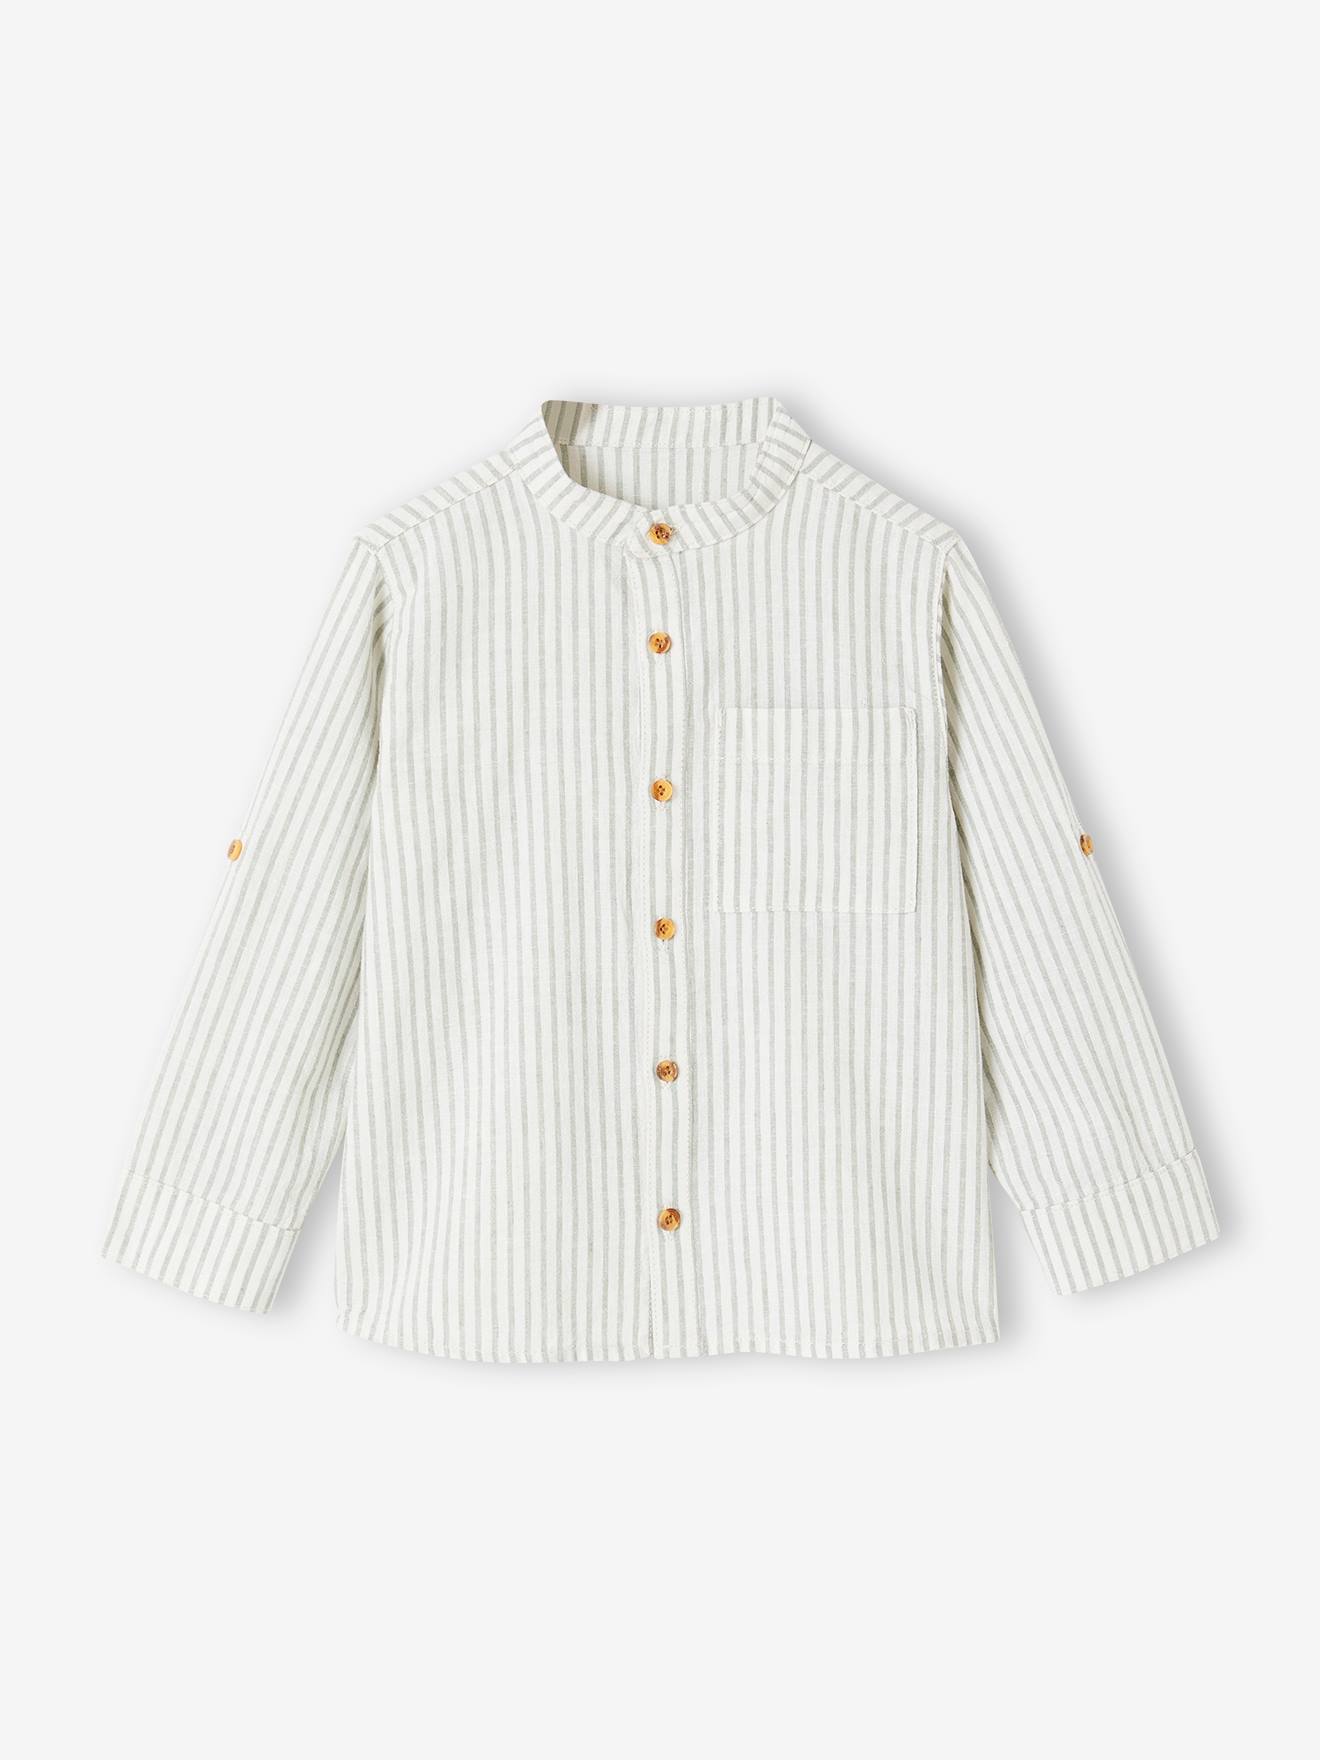 Striped Shirt with Mandarin Collar & Roll-Up Sleeves in Cotton/Linen for Boys striped green